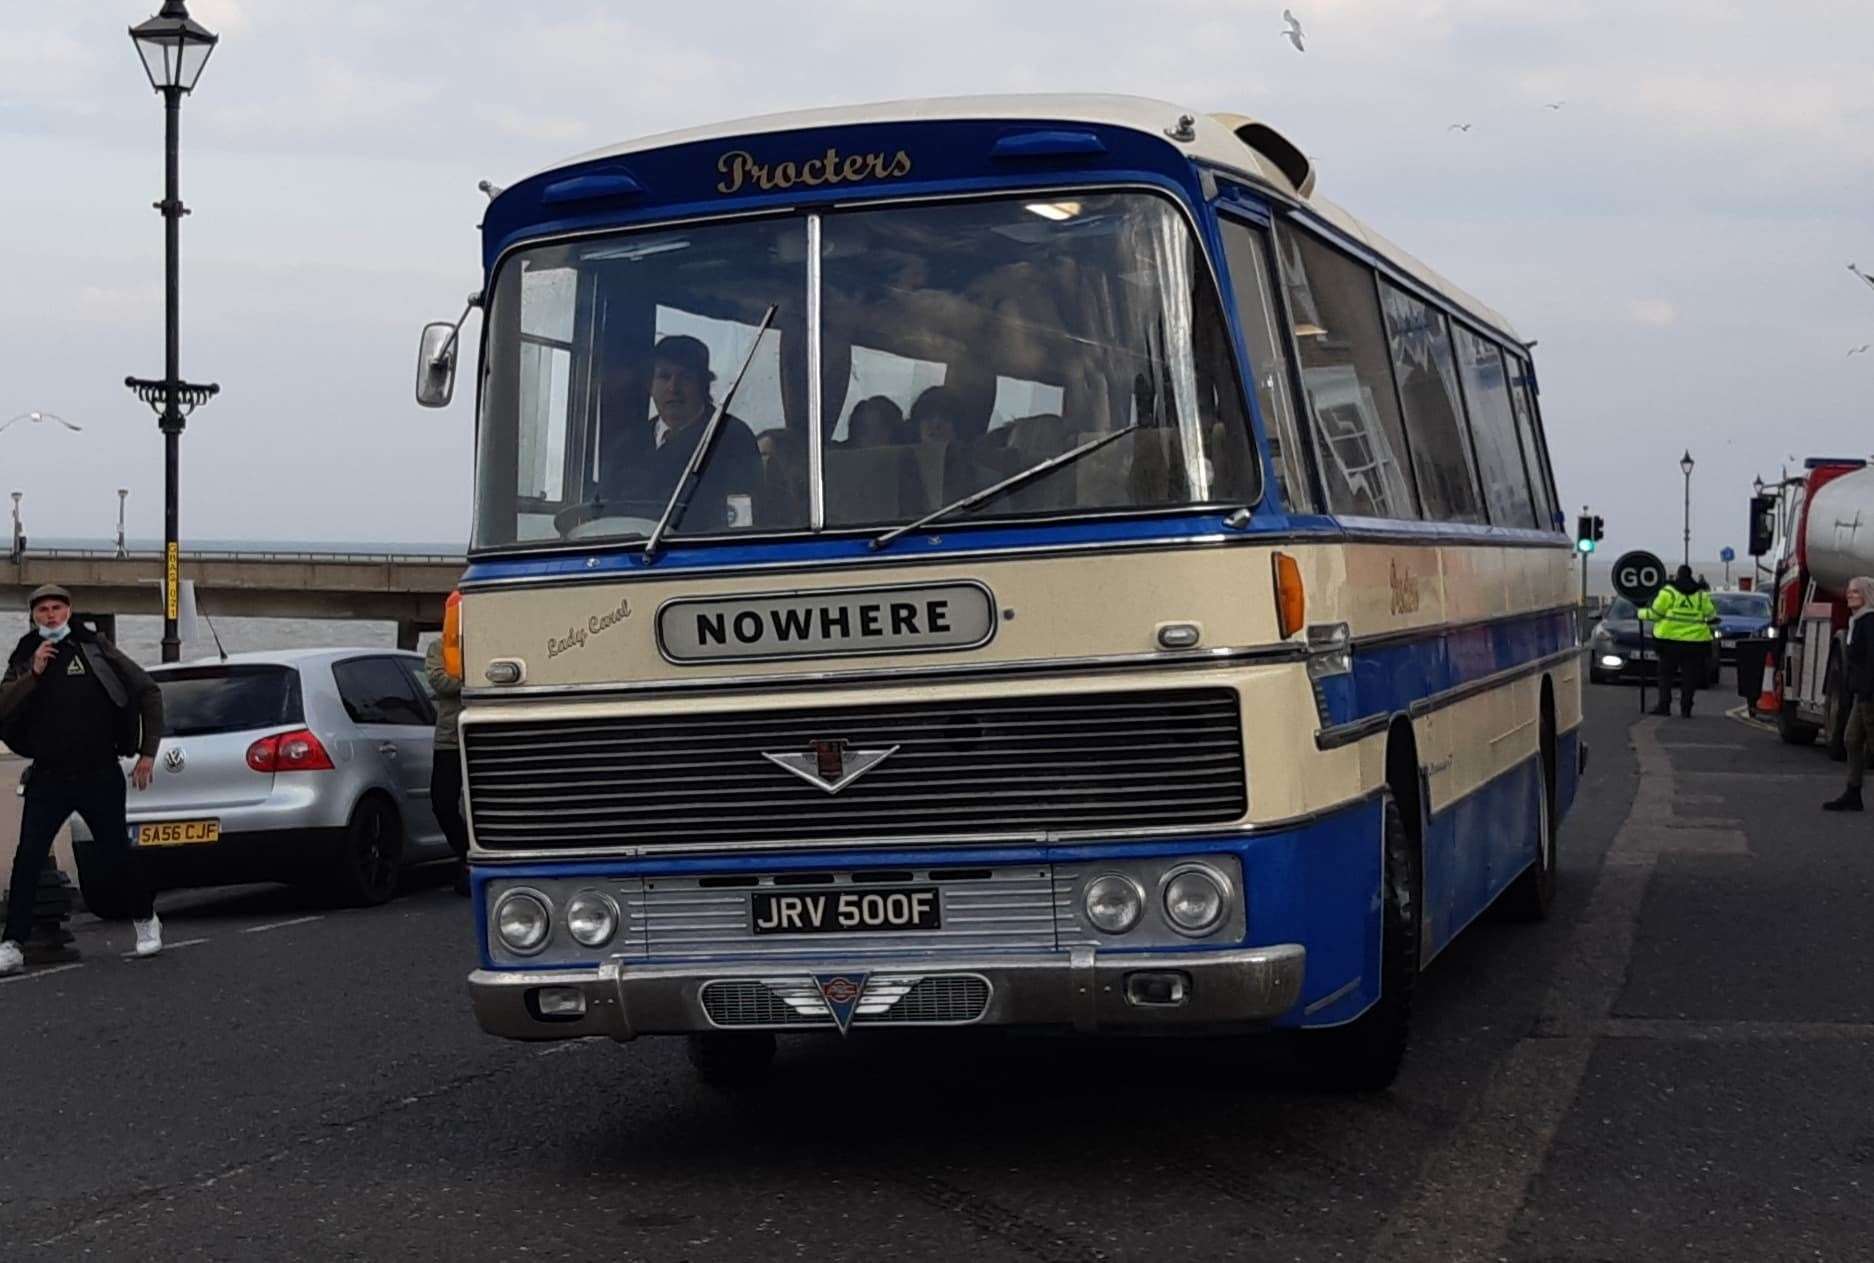 The Sex Pistols' 'Nowhere' tour bus in Deal during the filming of the TV drama Pistol in April. Picture: Sam Lennon